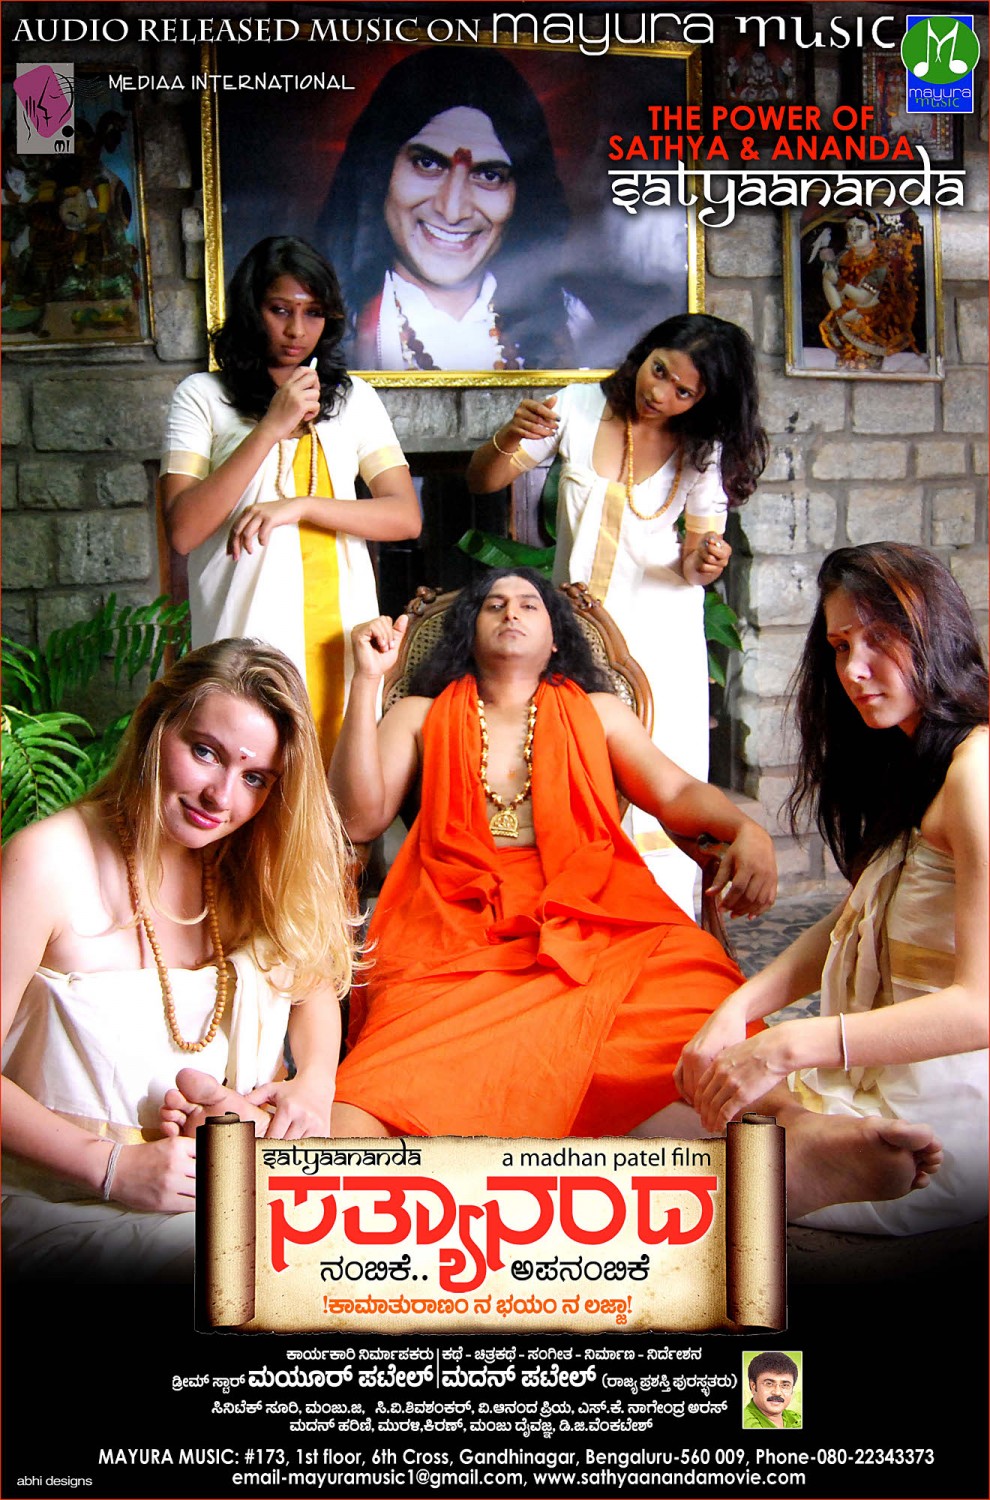 Extra Large Movie Poster Image for Sathyaananda (#1 of 17)